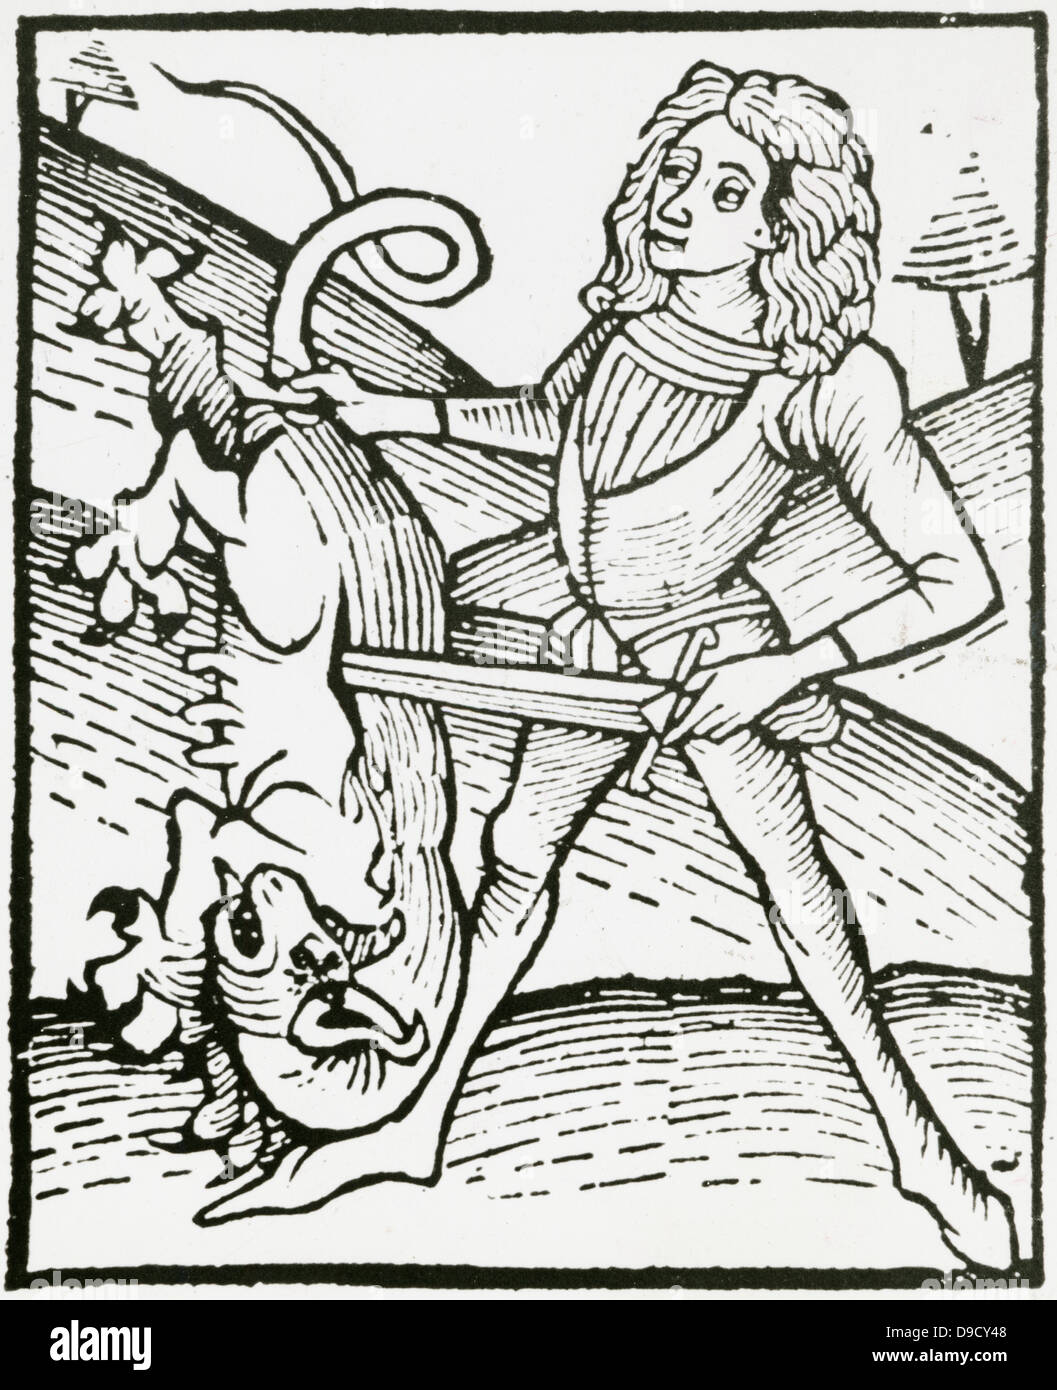 Killing a dragon to extract a precious stone transformed, alchemically, by the bird from an ordinary stone.  Woodcut from Ortus Sanitatis, Strasbourg, 1483 by Johannis de Cuba. Stock Photo